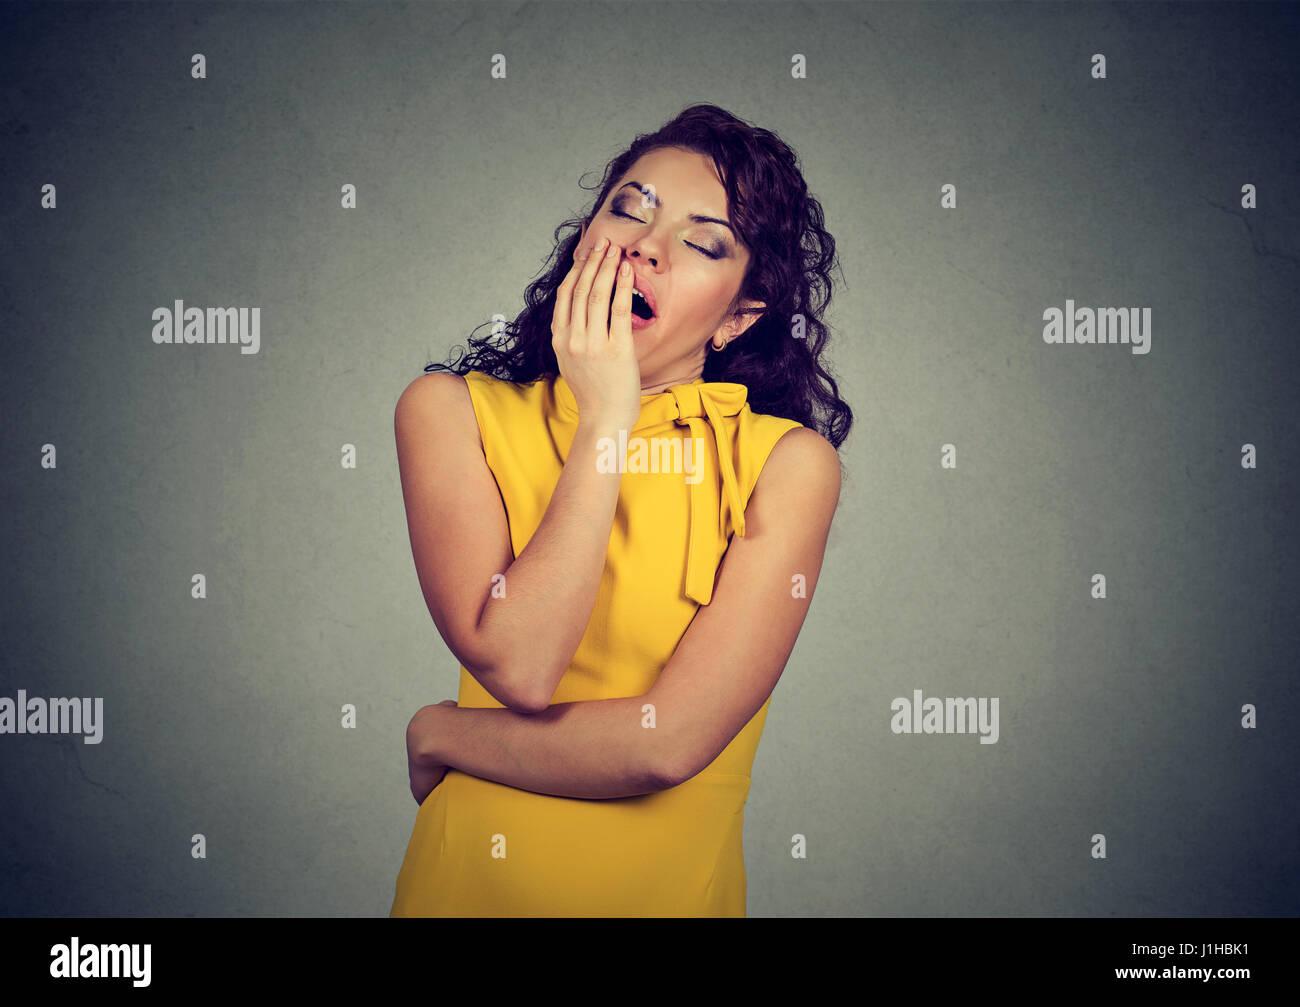 sleepy woman with wide open mouth yawning eyes closed looking bored isolated on gray wall background. Human face expression emotion Stock Photo